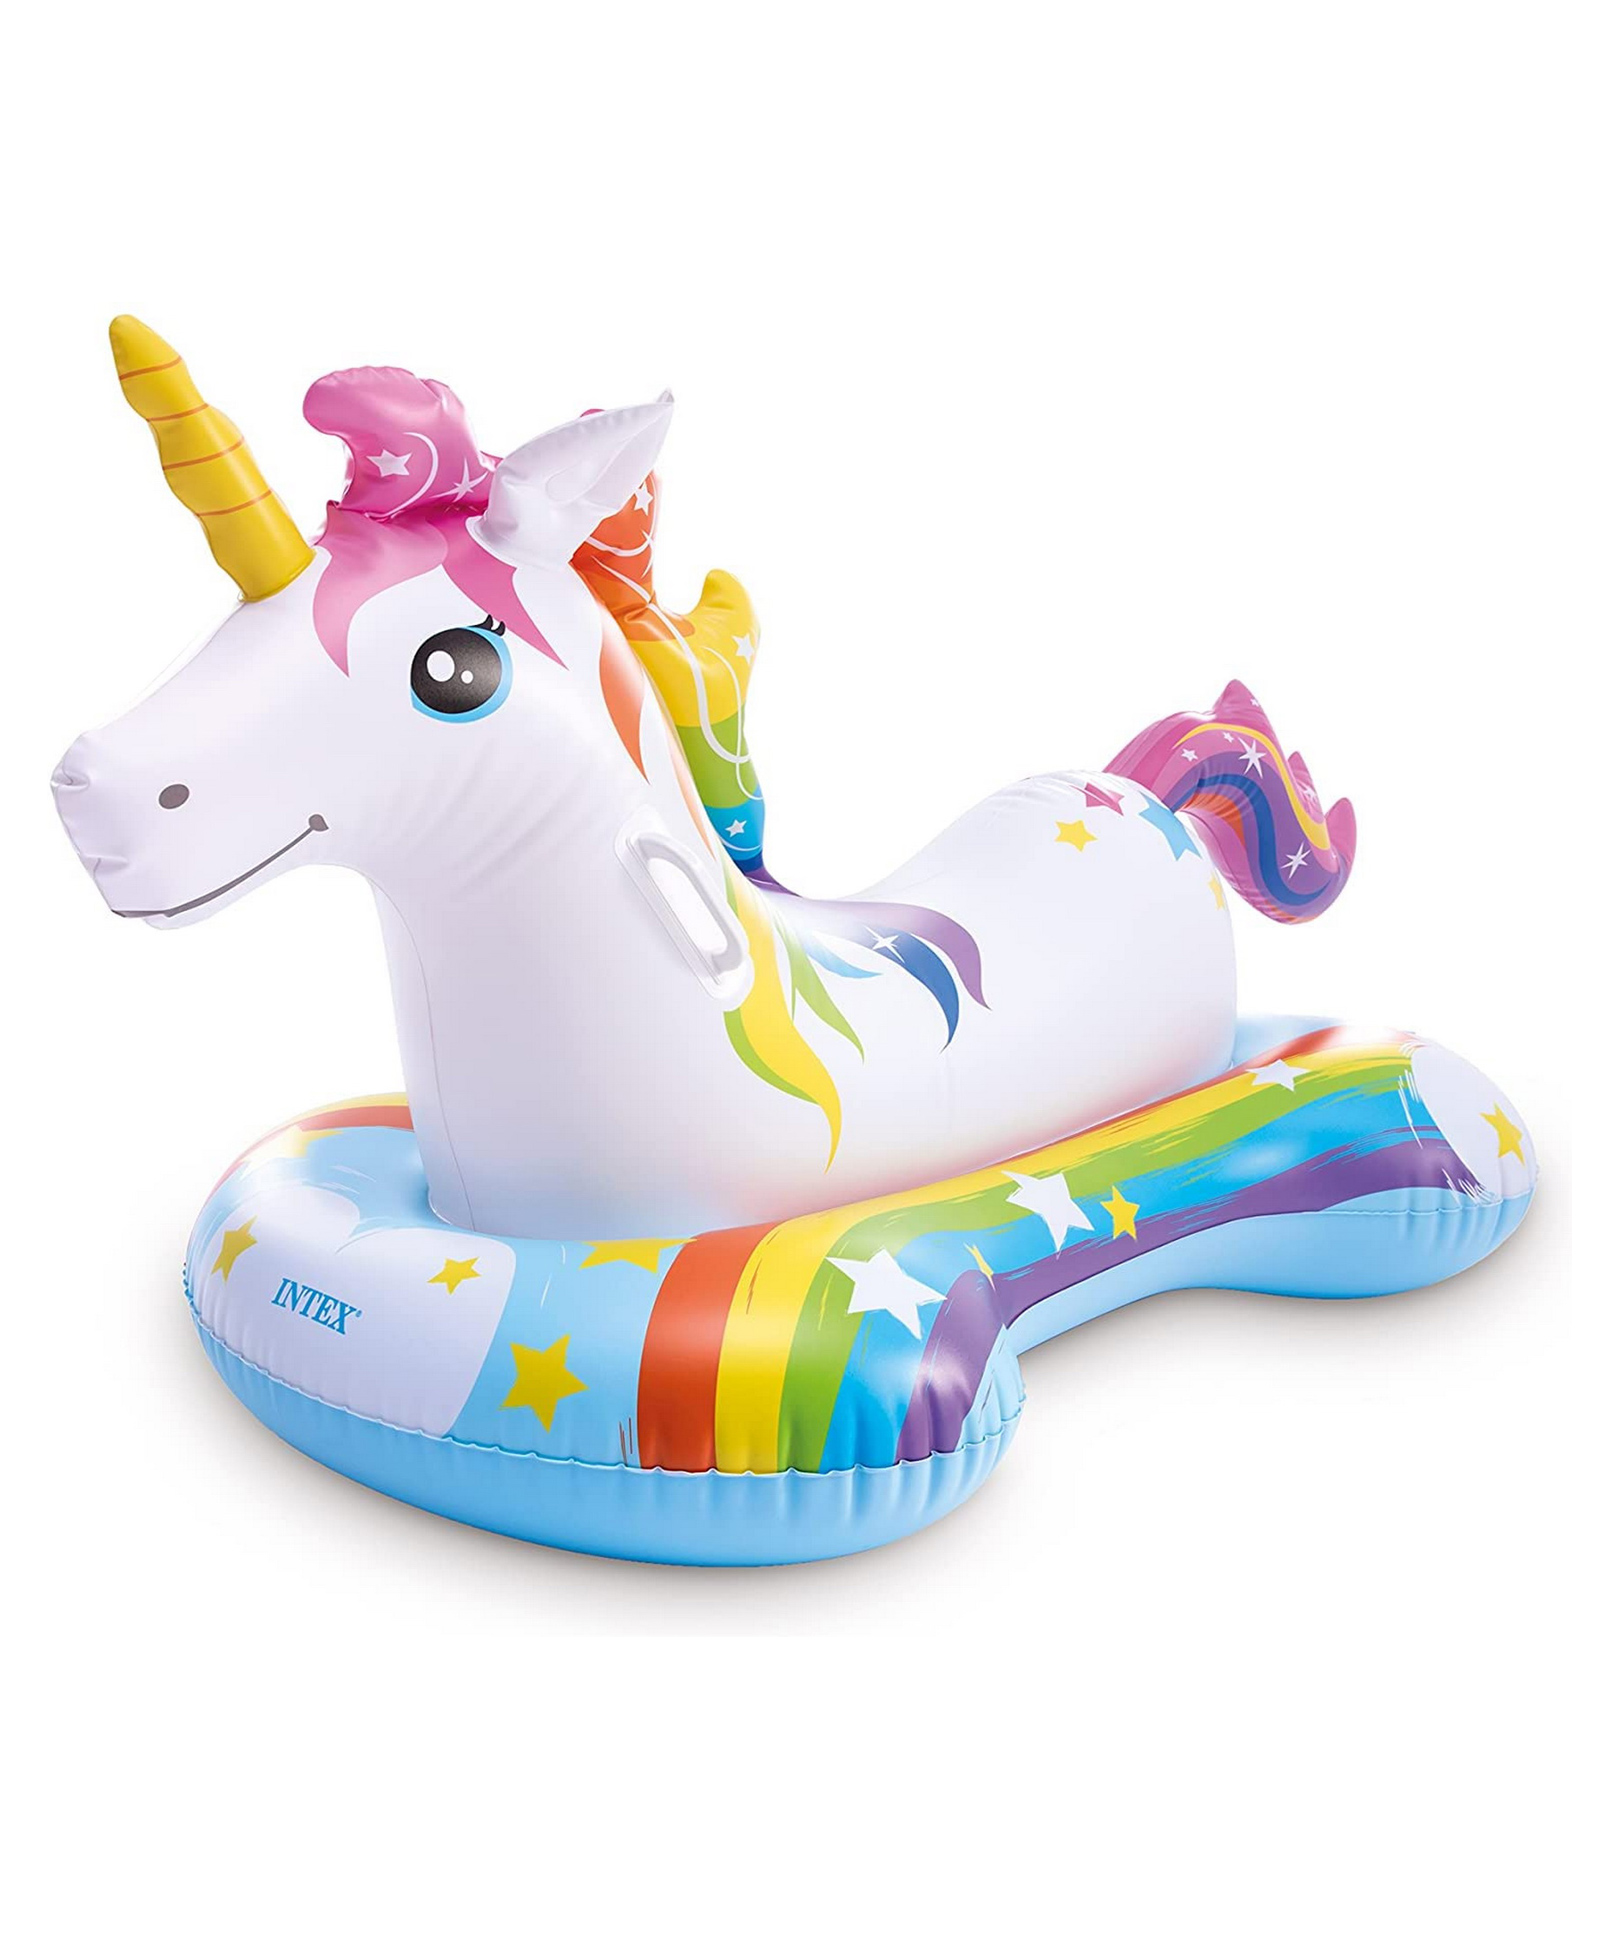 Intex Unicorn Theme Swimming Pool Ride on - Multicolour Online India, Buy  Sports Equipment for (3-6 Years) at FirstCry.com - 10438645